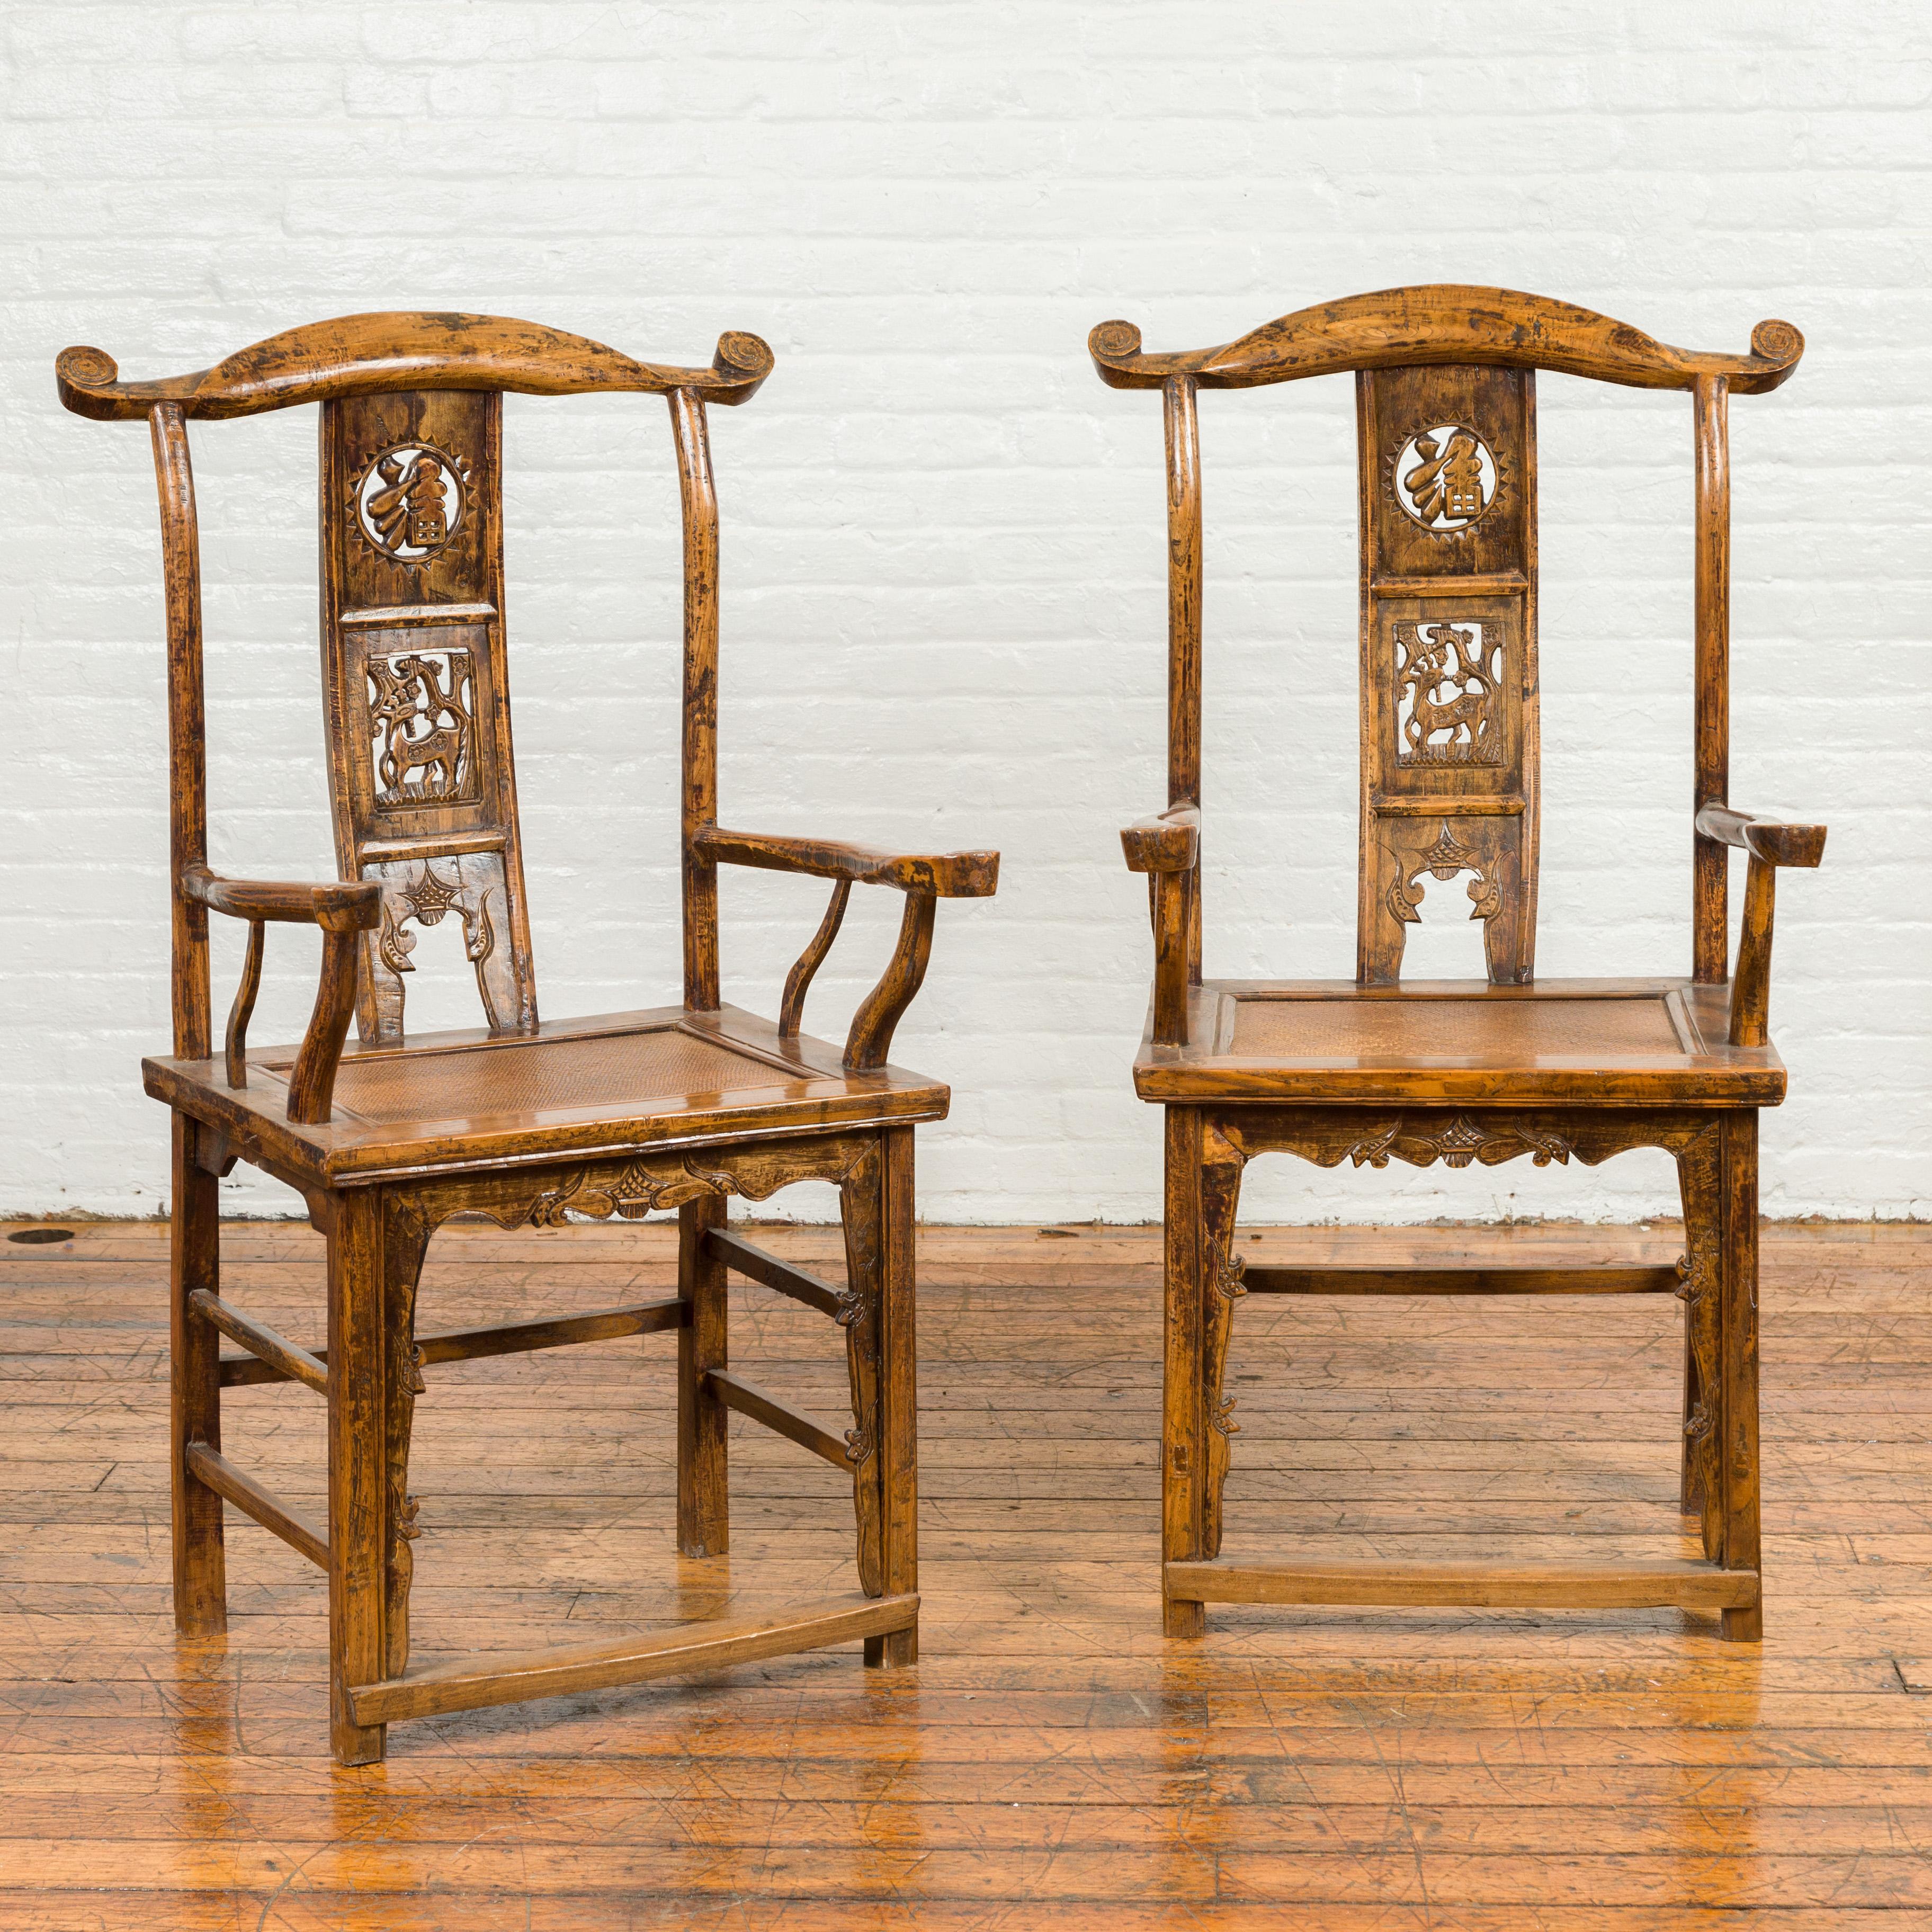 A pair of Chinese Qing Dynasty yoke back armchairs from the 19th century, with carved splats, brown patina, serpentine arms and side stretchers. Born in China during the Qing Dynasty, each of this pair of armchairs features a tall back, topped with